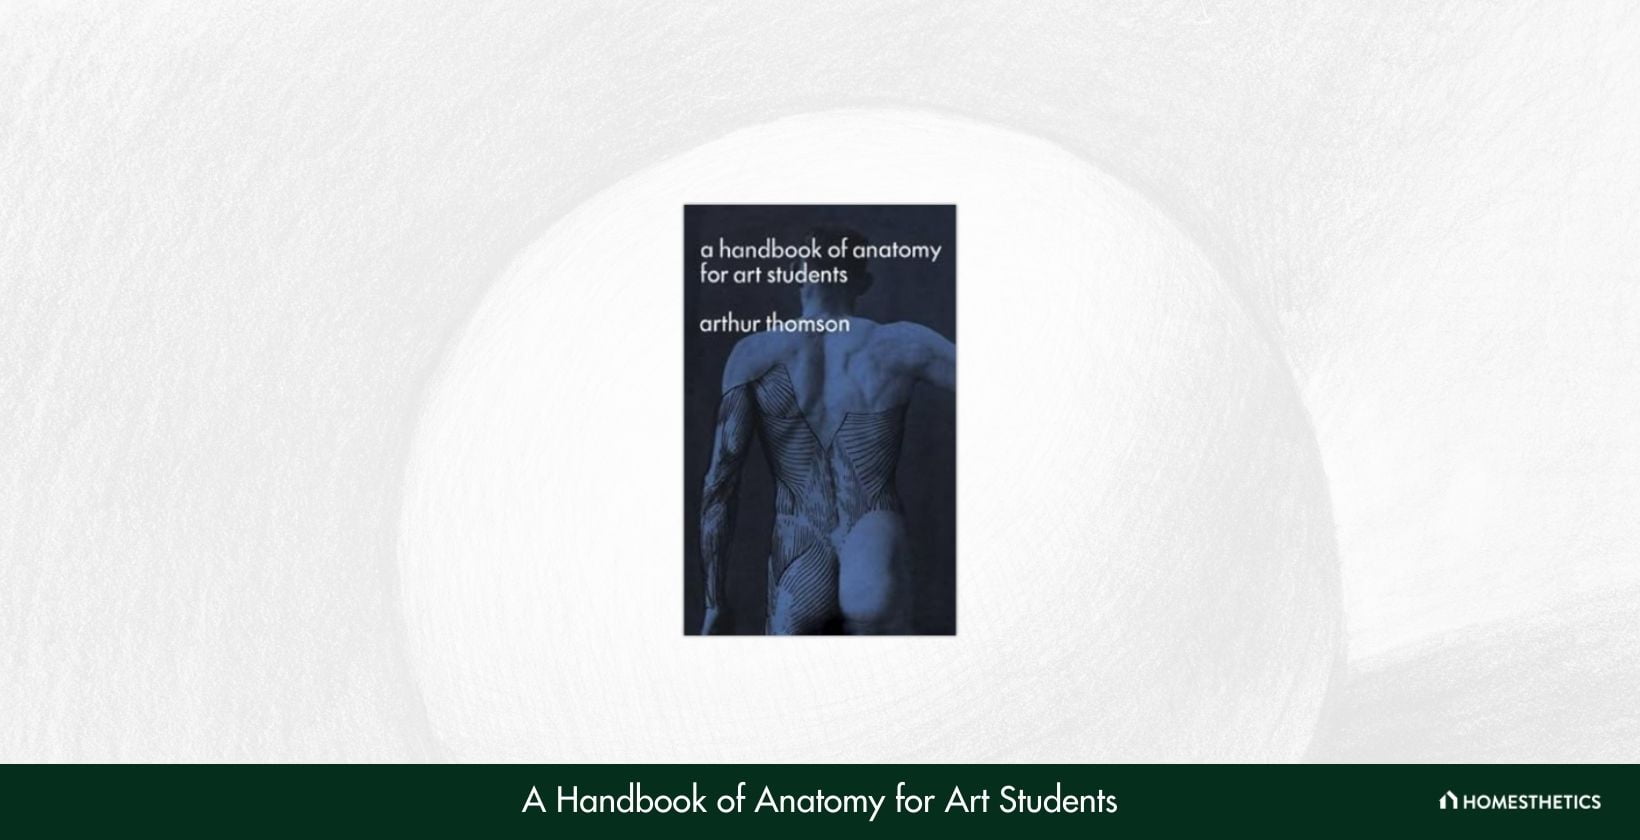 A Handbook of Anatomy for Art Students by Arthur Thomson